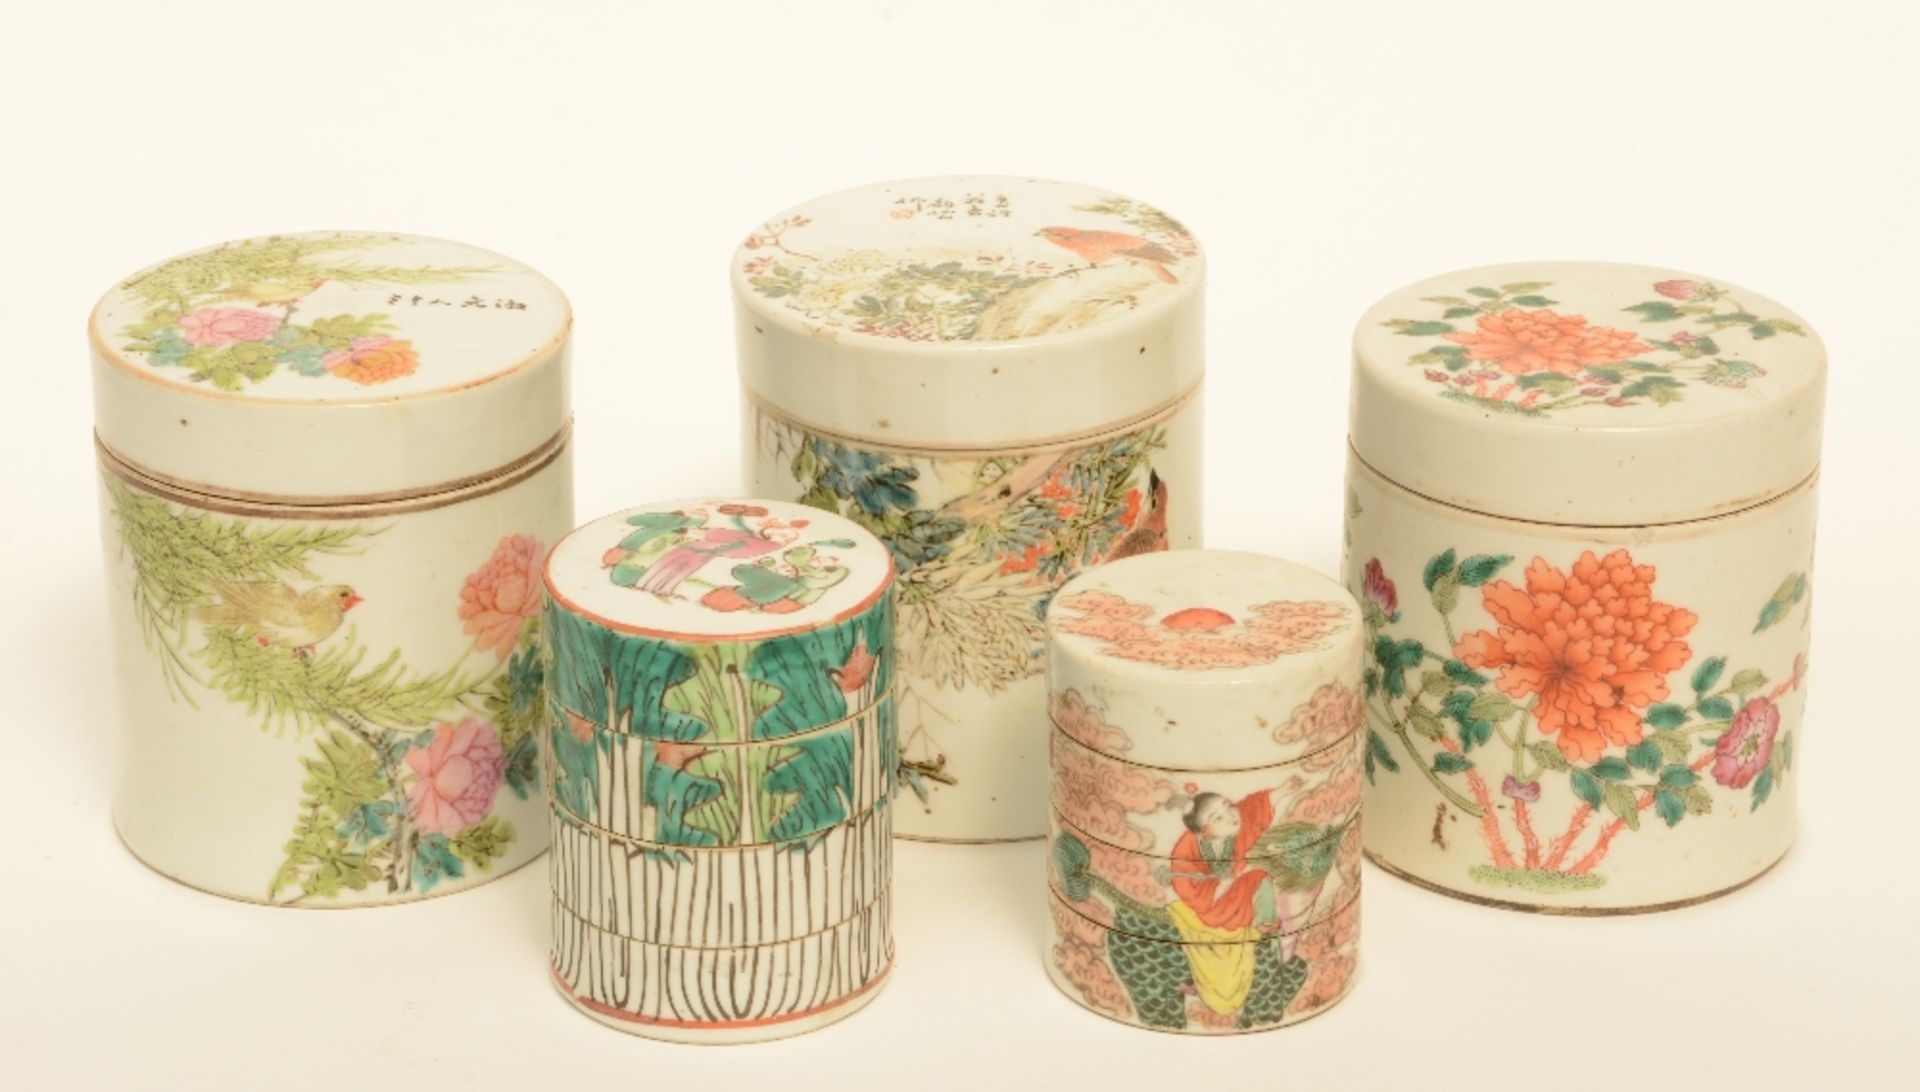 Five Chinese polychrome decorated pots with cover depicting figures, flowers and birds, ca. 1900,